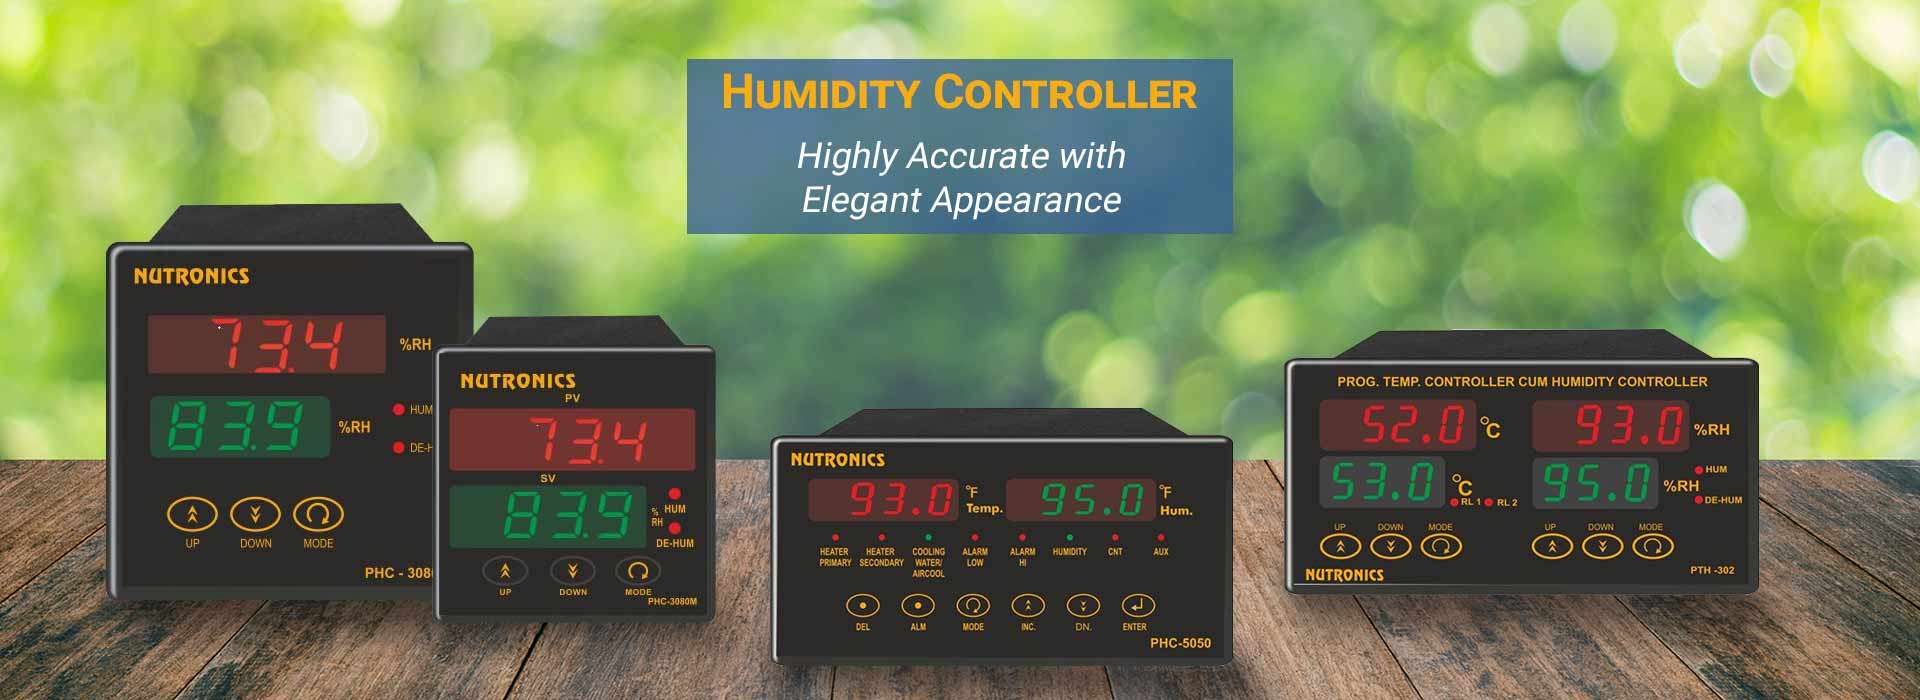  Humidity controller Manufacturers in India